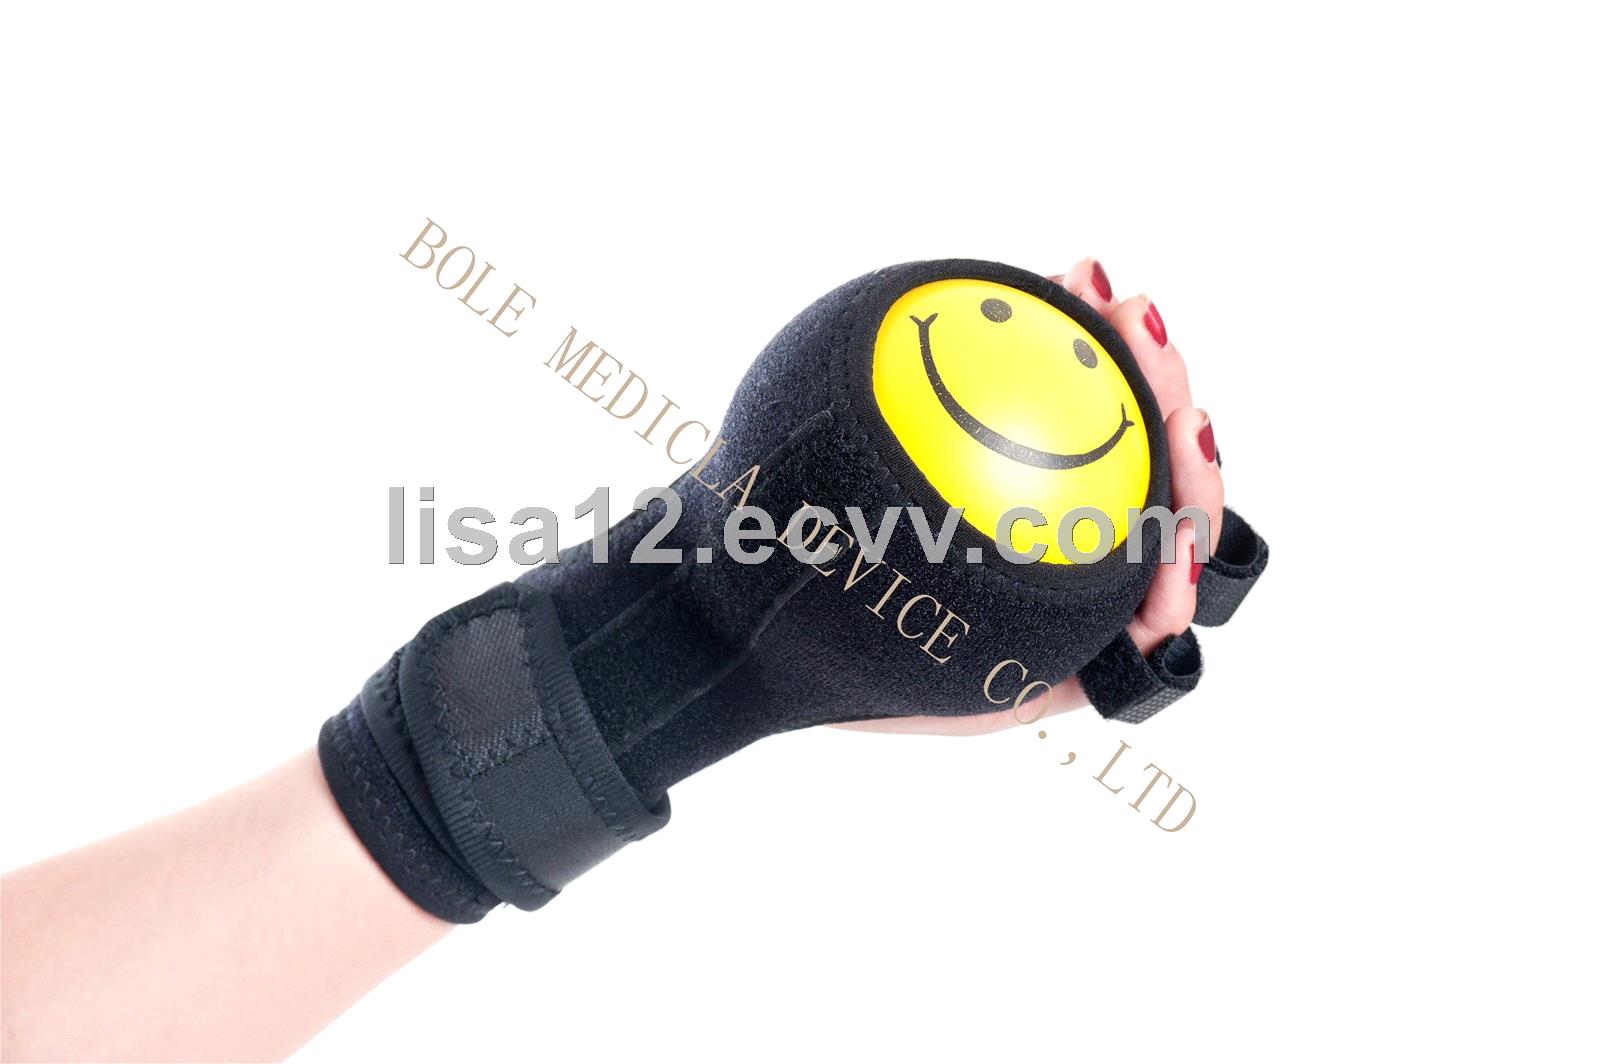 Egg Shaped Hand Therapy Ball Rehabilitation Wrist Finger Recovery Trainer